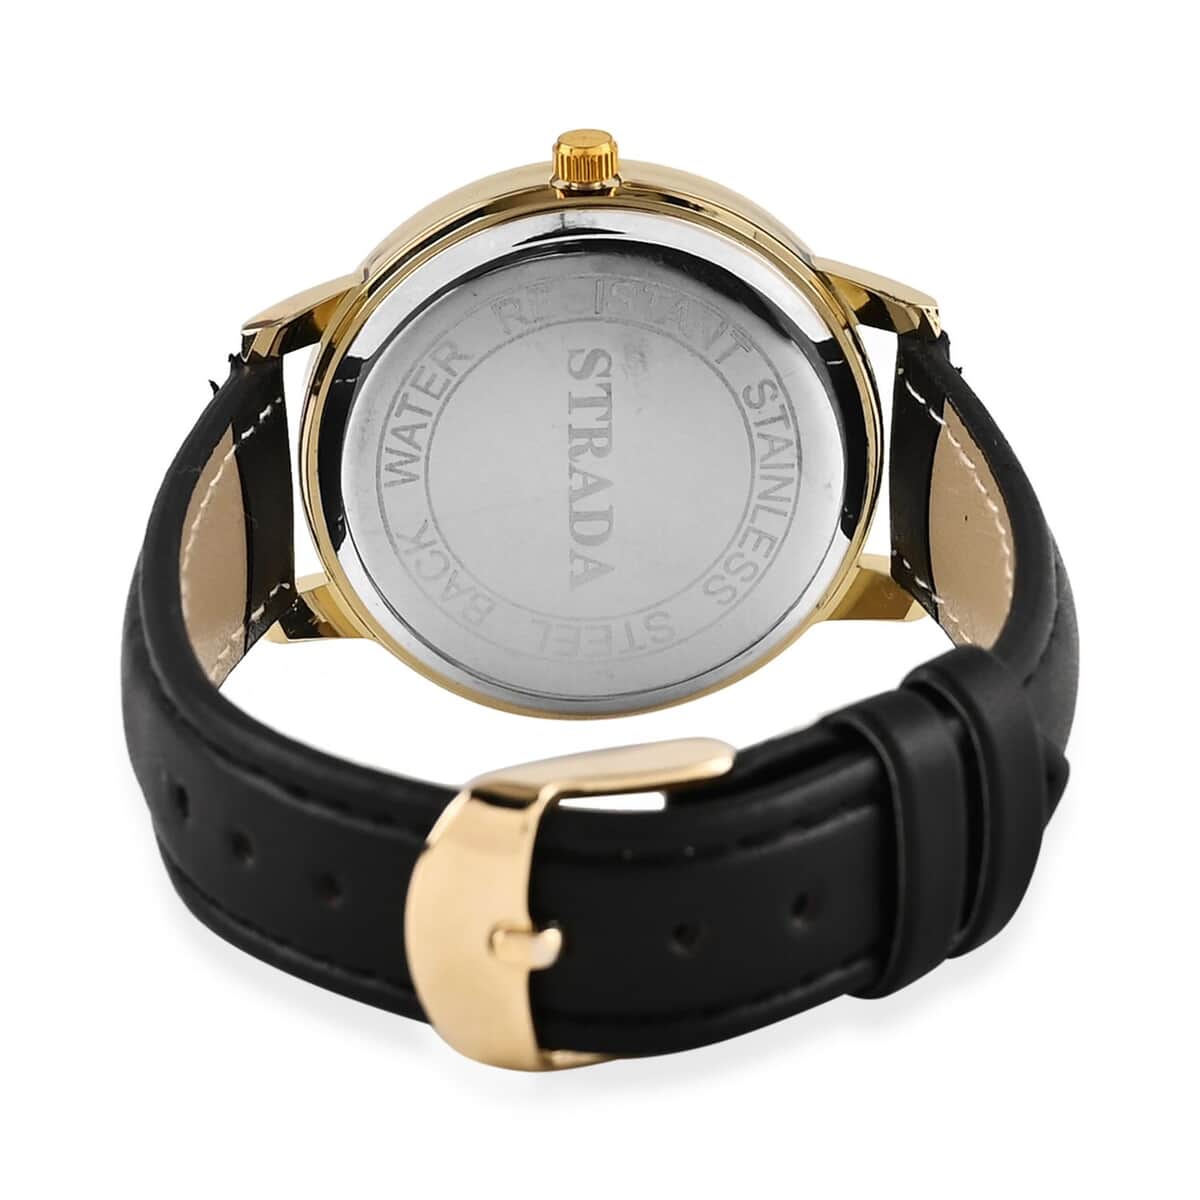 Strada Black Austrian Crystal Japanese Movement Watch in Goldtone with Black Faux Leather Strap (35.56mm) (6.75-8.5 Inches) image number 6